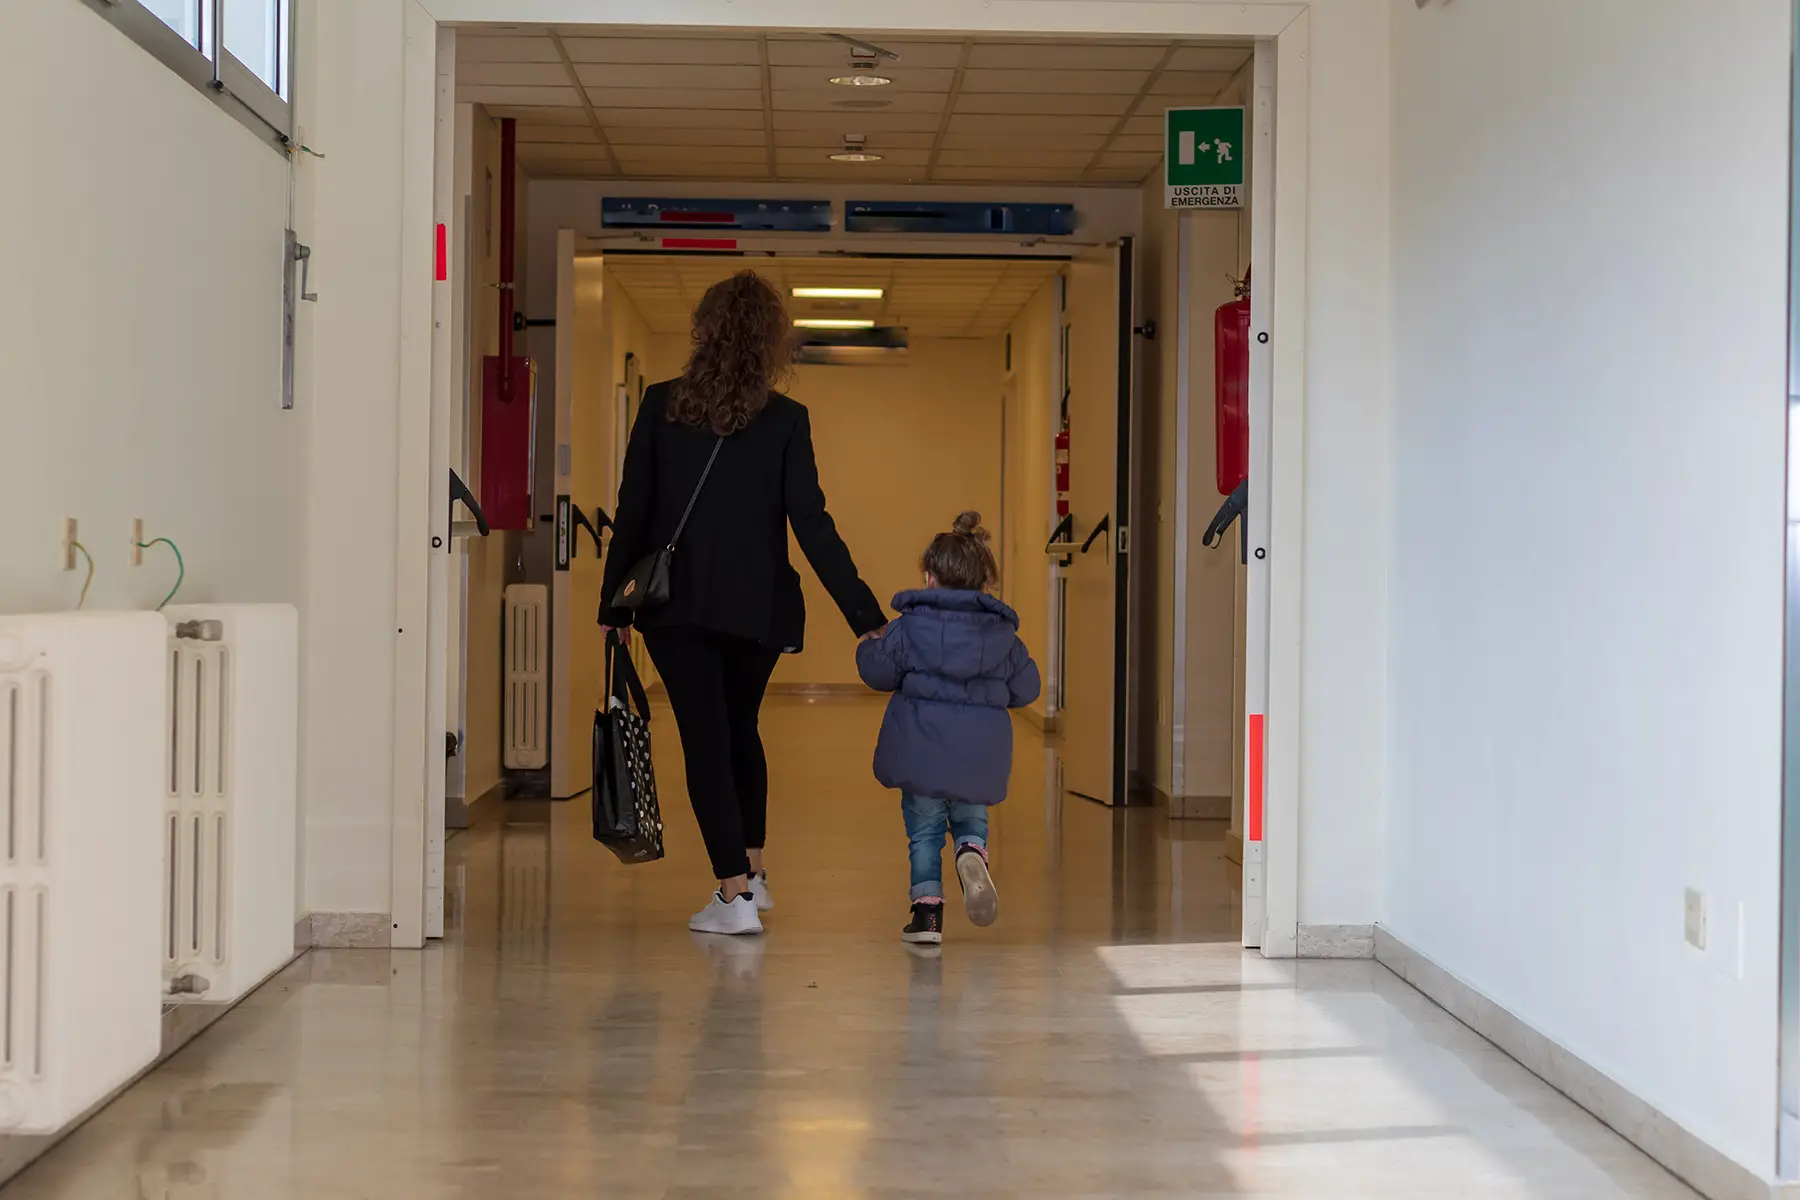 A woman and a child walking down a hospital corridor